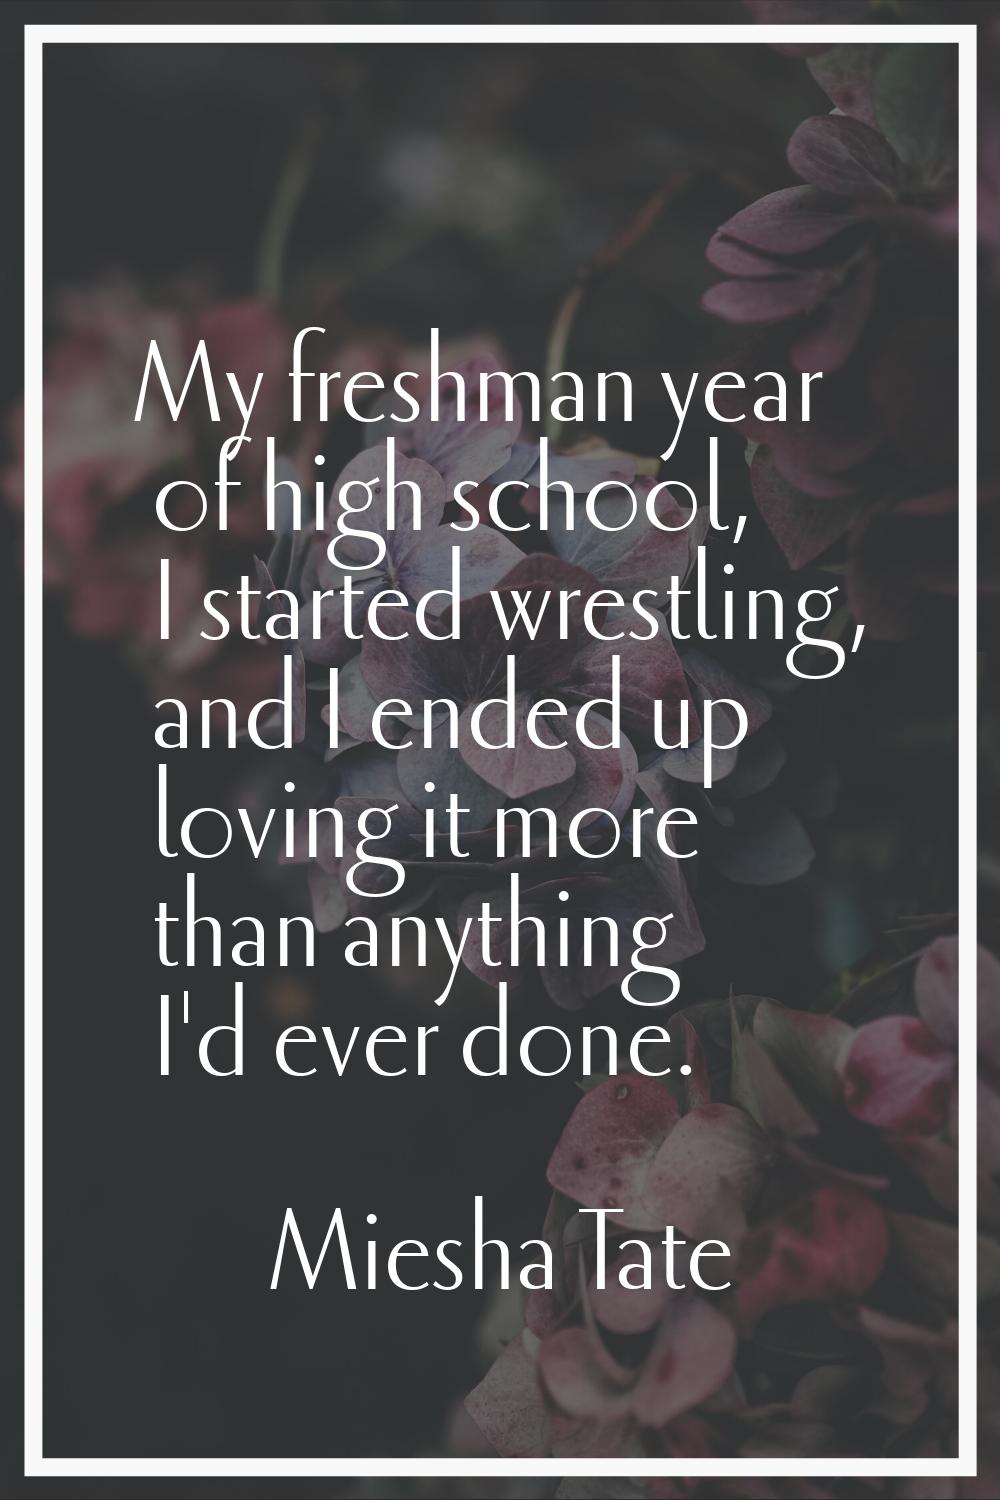 My freshman year of high school, I started wrestling, and I ended up loving it more than anything I